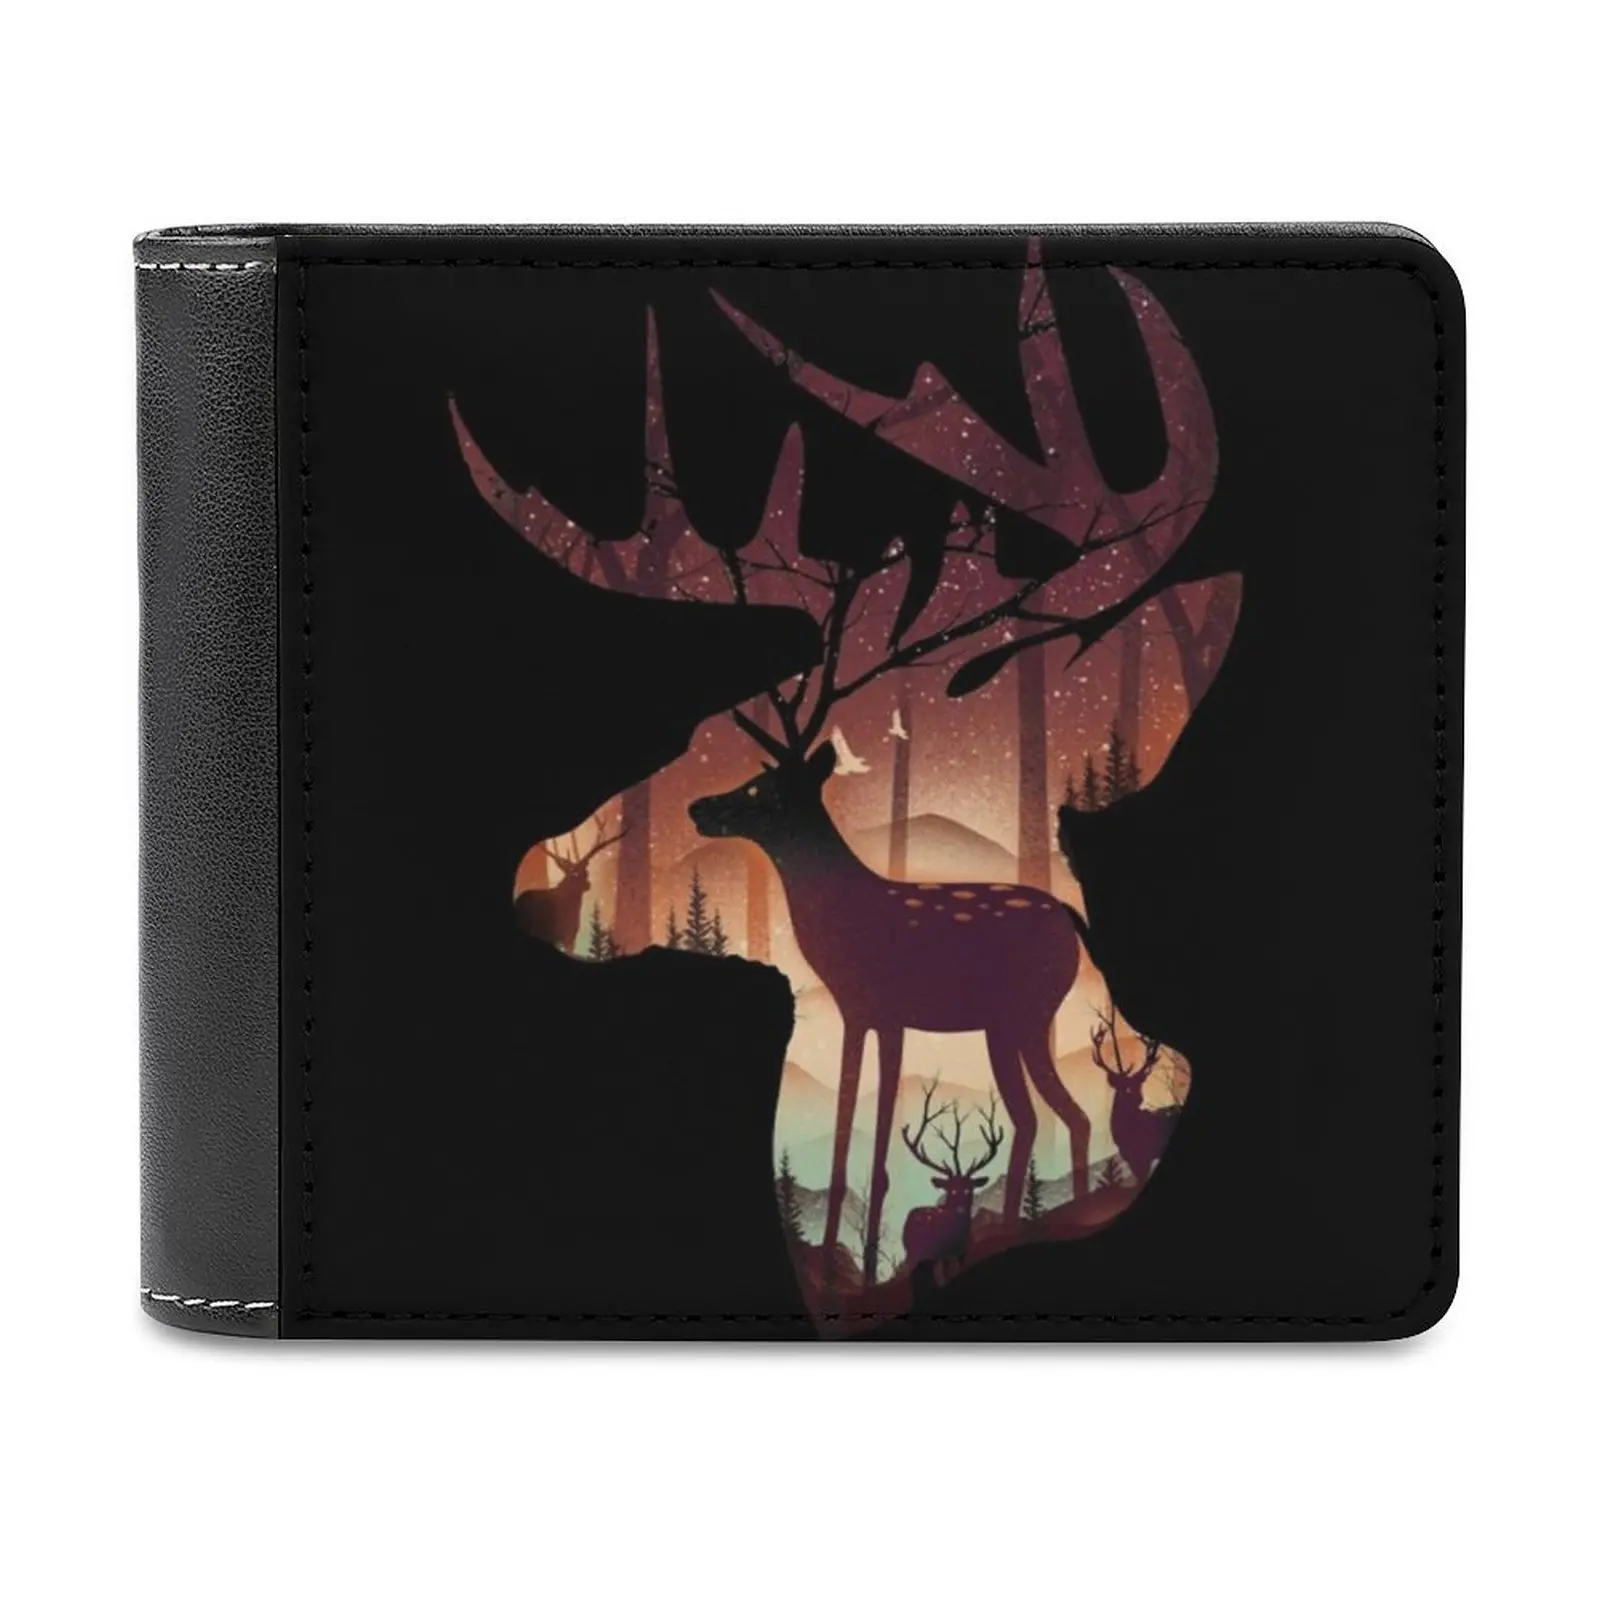 

Mystical Deer Leather Wallet Men's Wallet Purse Money Clips Deer Stag Mystical Nature Forest Trees Illusion Deers Animal